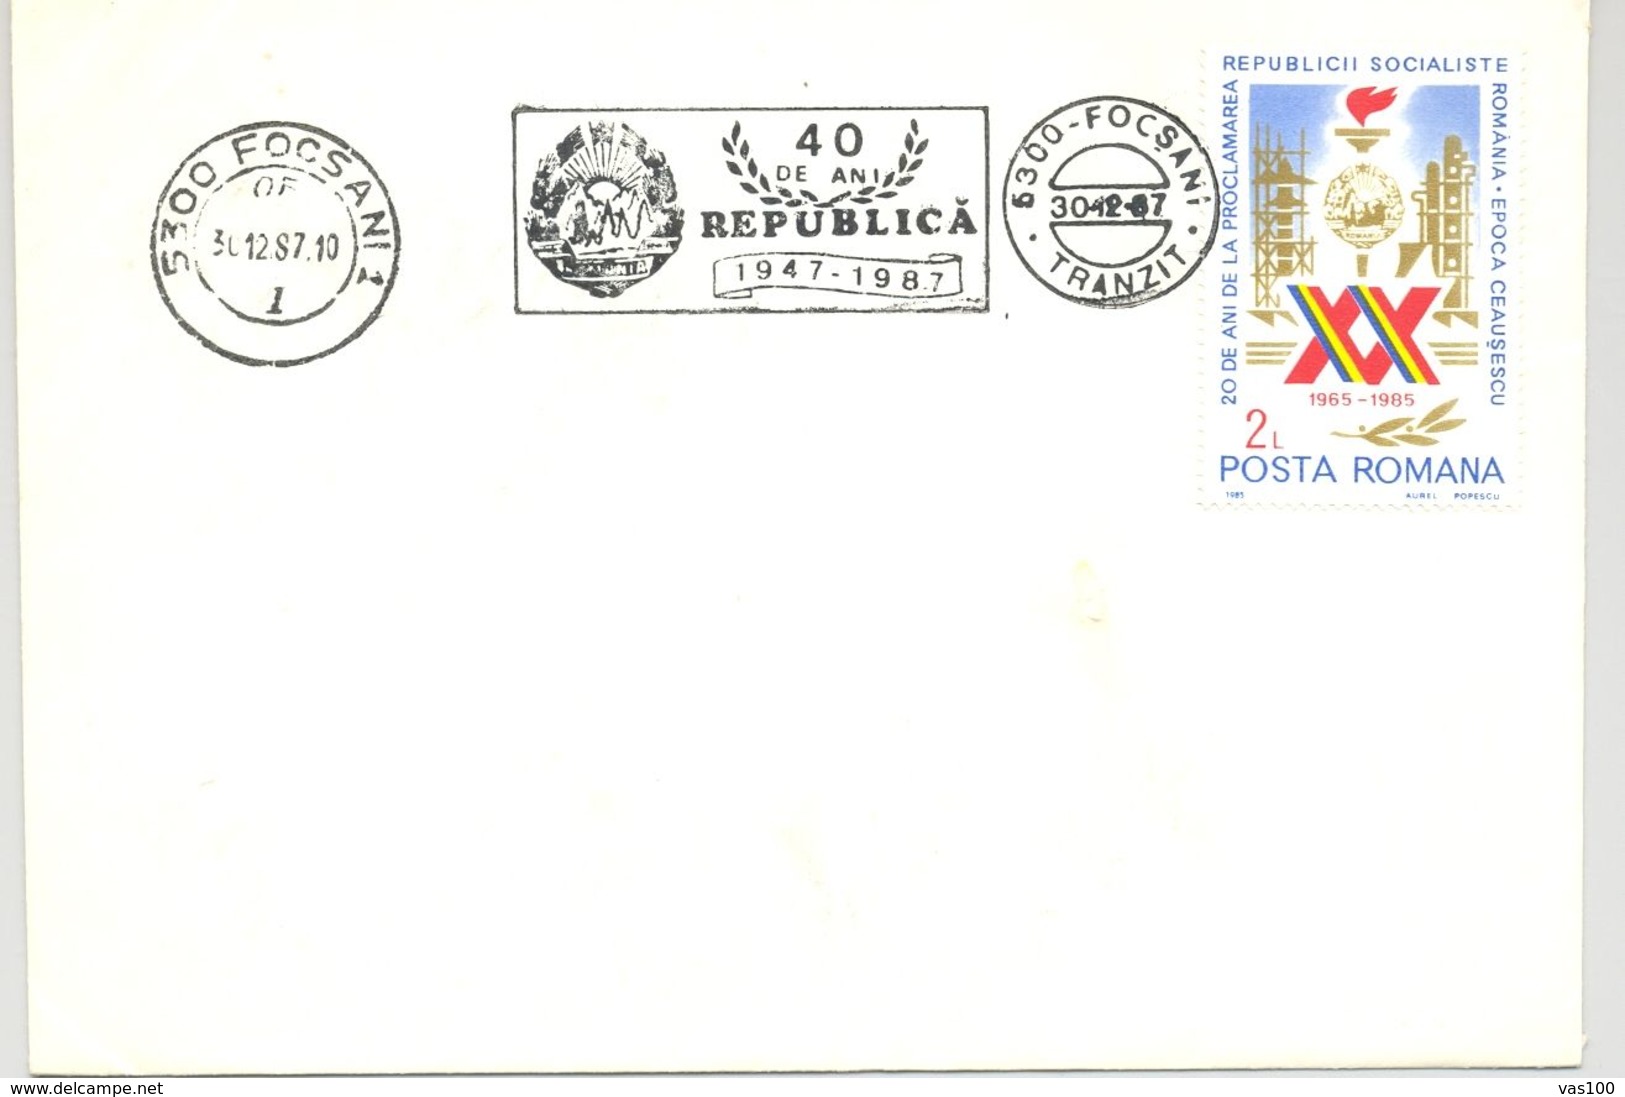 SOCIALIST REPUBLIC NATIONAL DAY, AUGUST 23, SPECIAL POSTMARK AND STAMP ON COVER, 1987, ROMANIA - Lettres & Documents